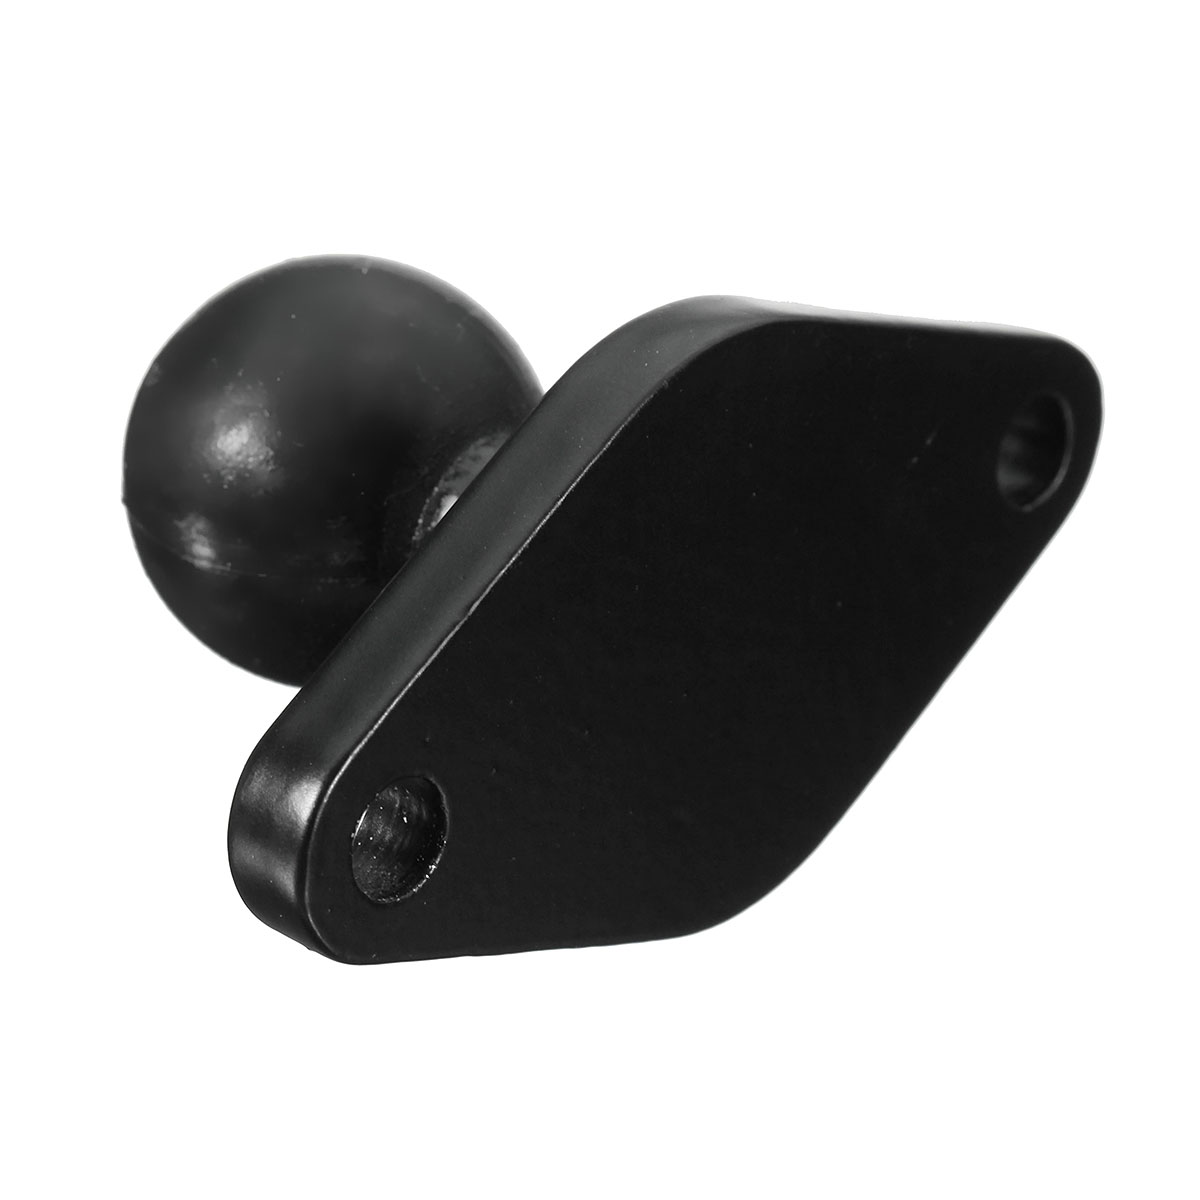 Black Motorcycle GPS Holder Mounting Aluminum 1Inch Ball with Diamond Shape Plate